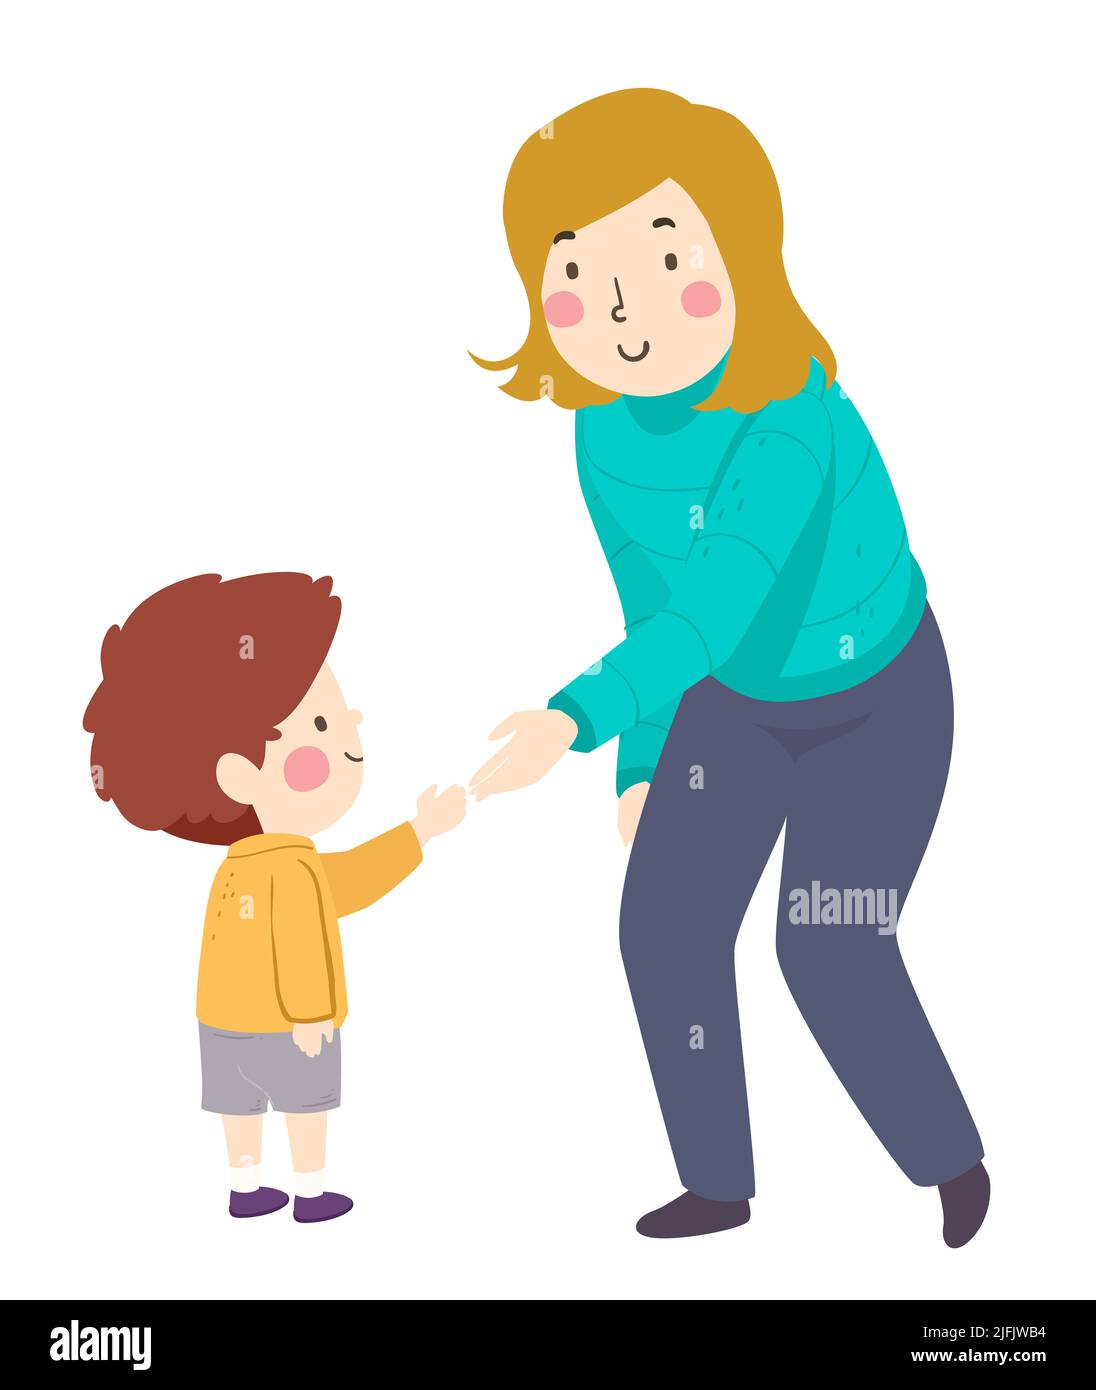 Illustration of Kid Boy Extending His Arm to Shake Hands with Adult Girl Stock Photo